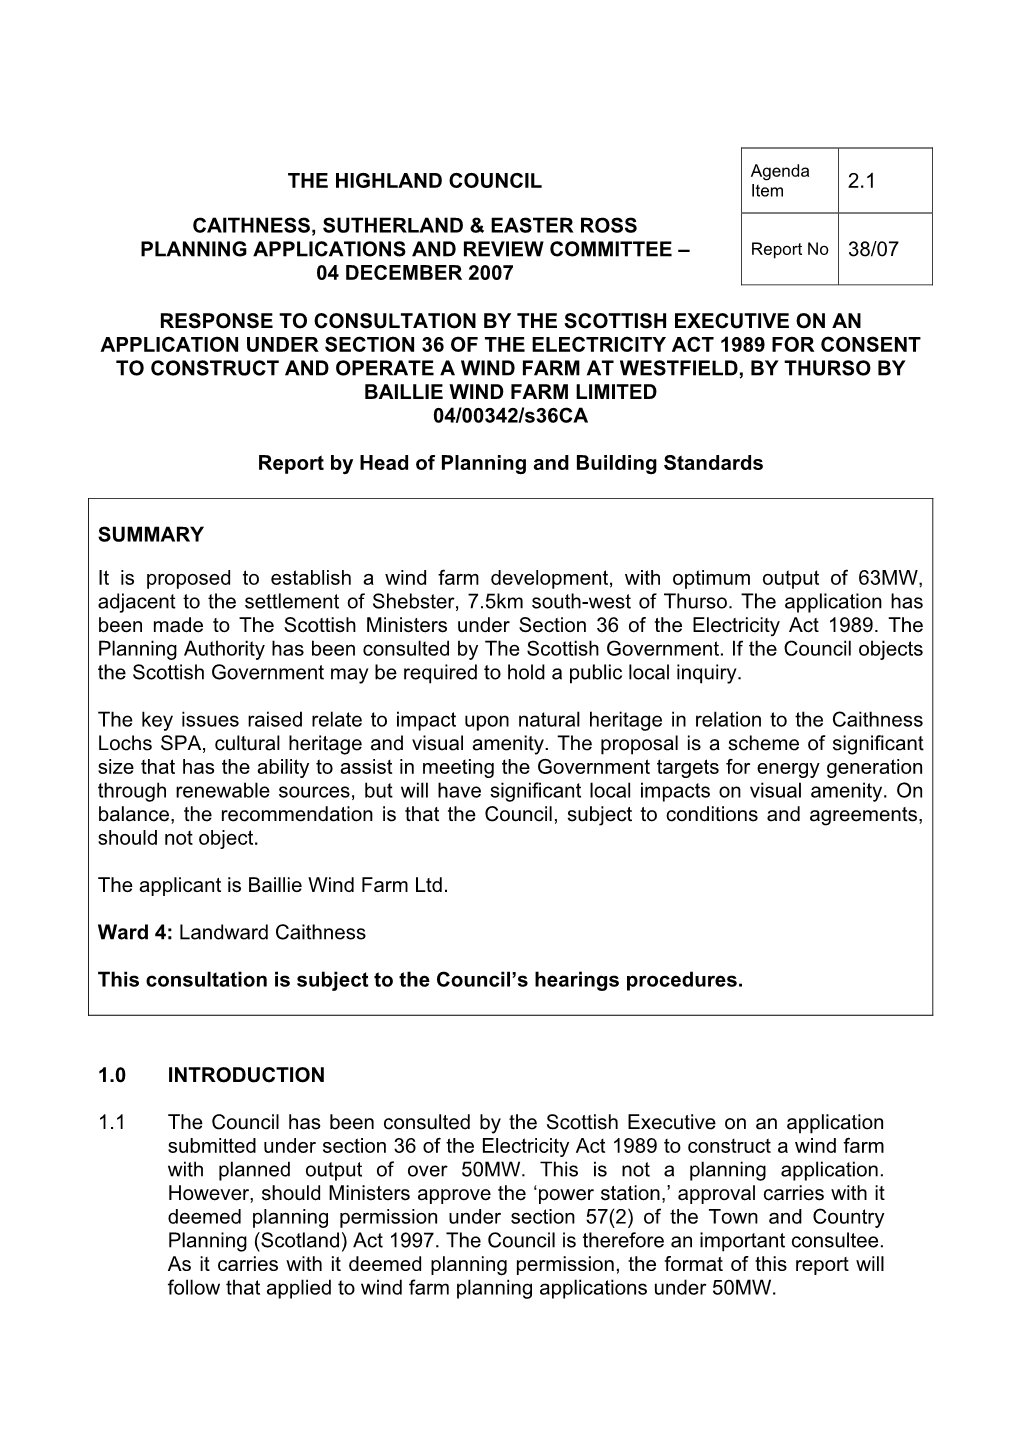 THE HIGHLAND COUNCIL Item 2.1 CAITHNESS, SUTHERLAND & EASTER ROSS PLANNING APPLICATIONS and REVIEW COMMITTEE – Report No 38/07 04 DECEMBER 2007